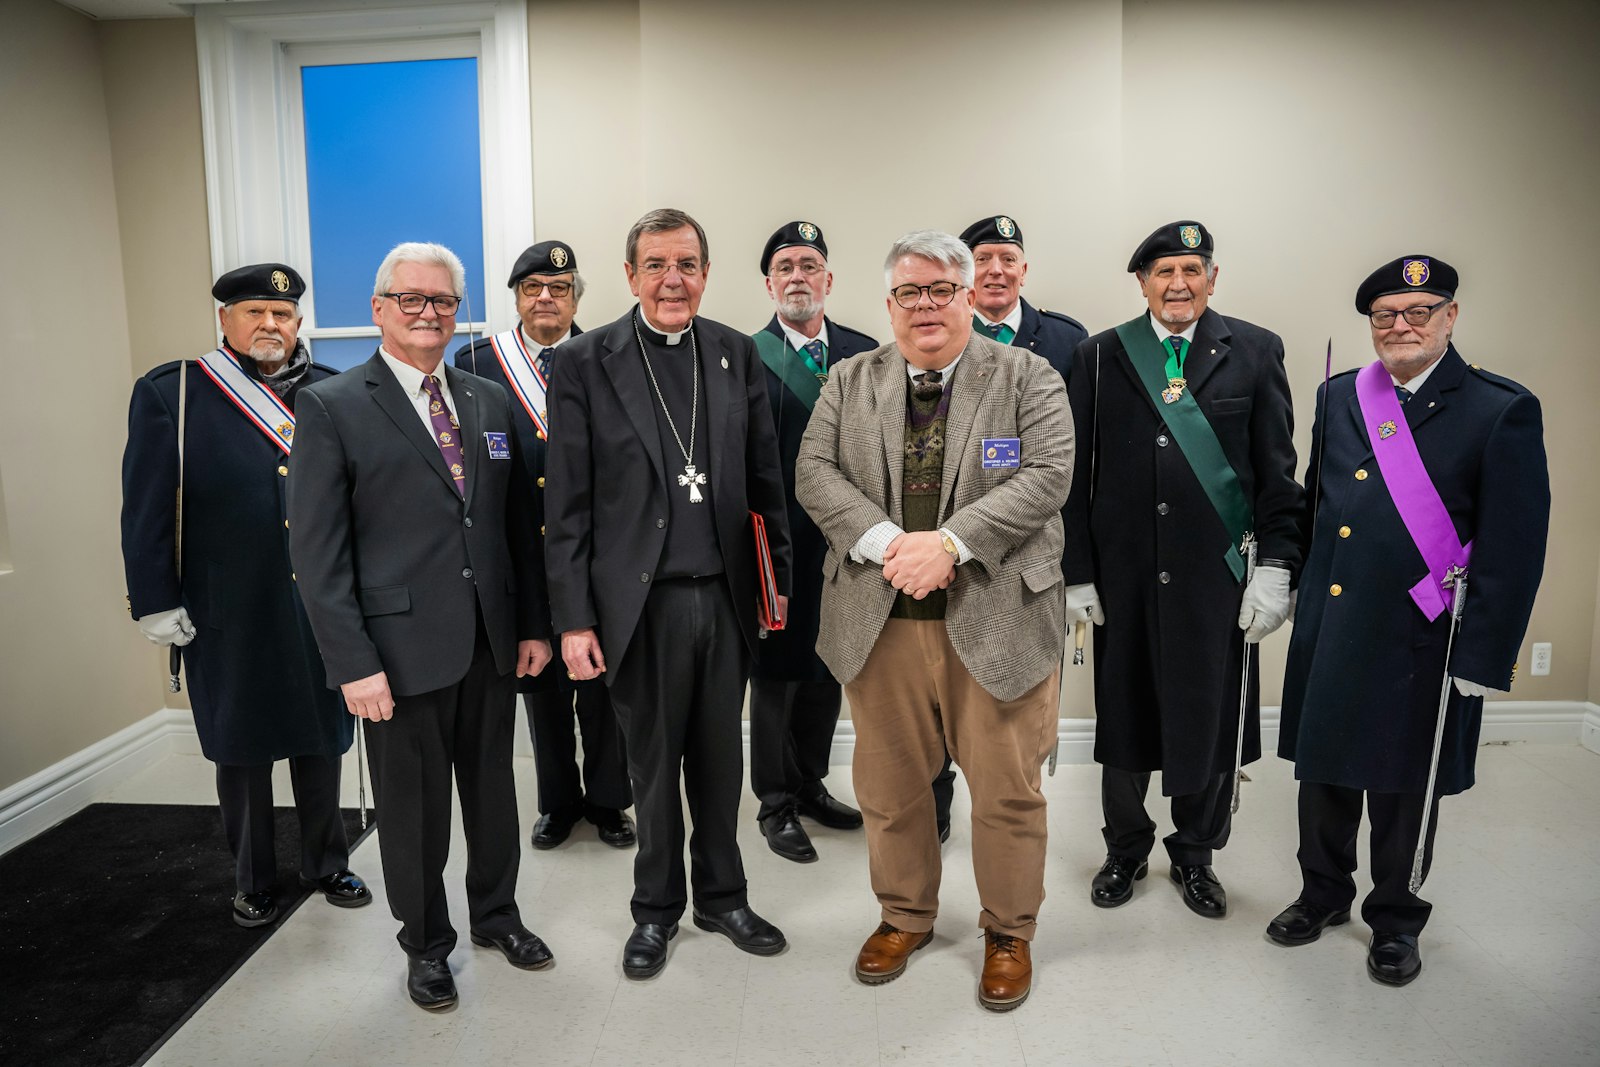 Speaking at the dedication, Knights of Columbus state deputy Christopher Kolomjec (fourth from right) said the Knights plan to continue to support the Heart of Christ Clinic and to support efforts to open similar clinics in each of Michigan's dioceses.